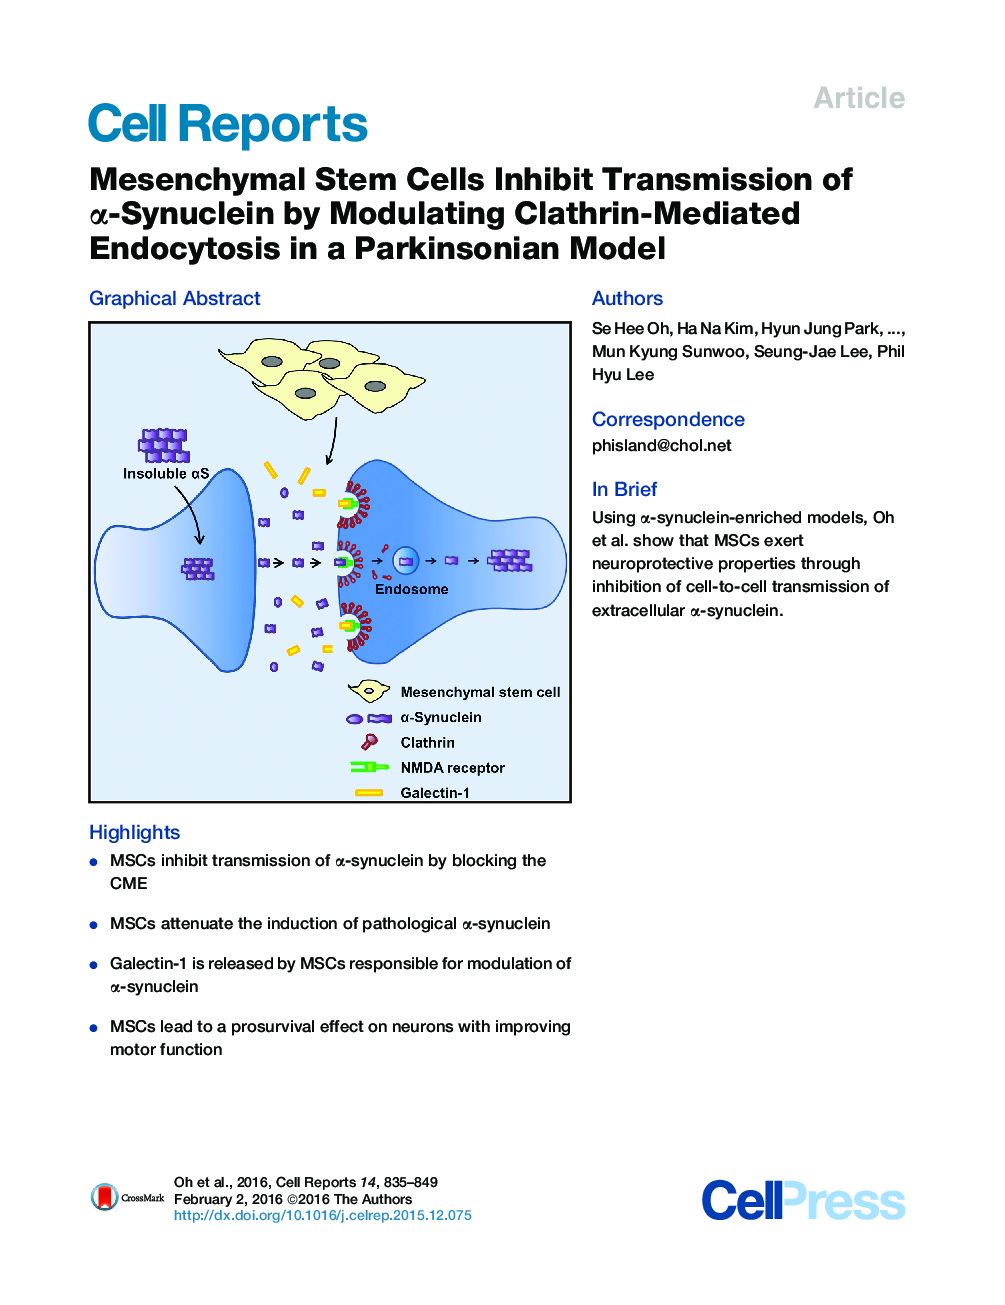 Mesenchymal Stem Cells Inhibit Transmission of α-Synuclein by Modulating Clathrin-Mediated Endocytosis in a Parkinsonian Model 